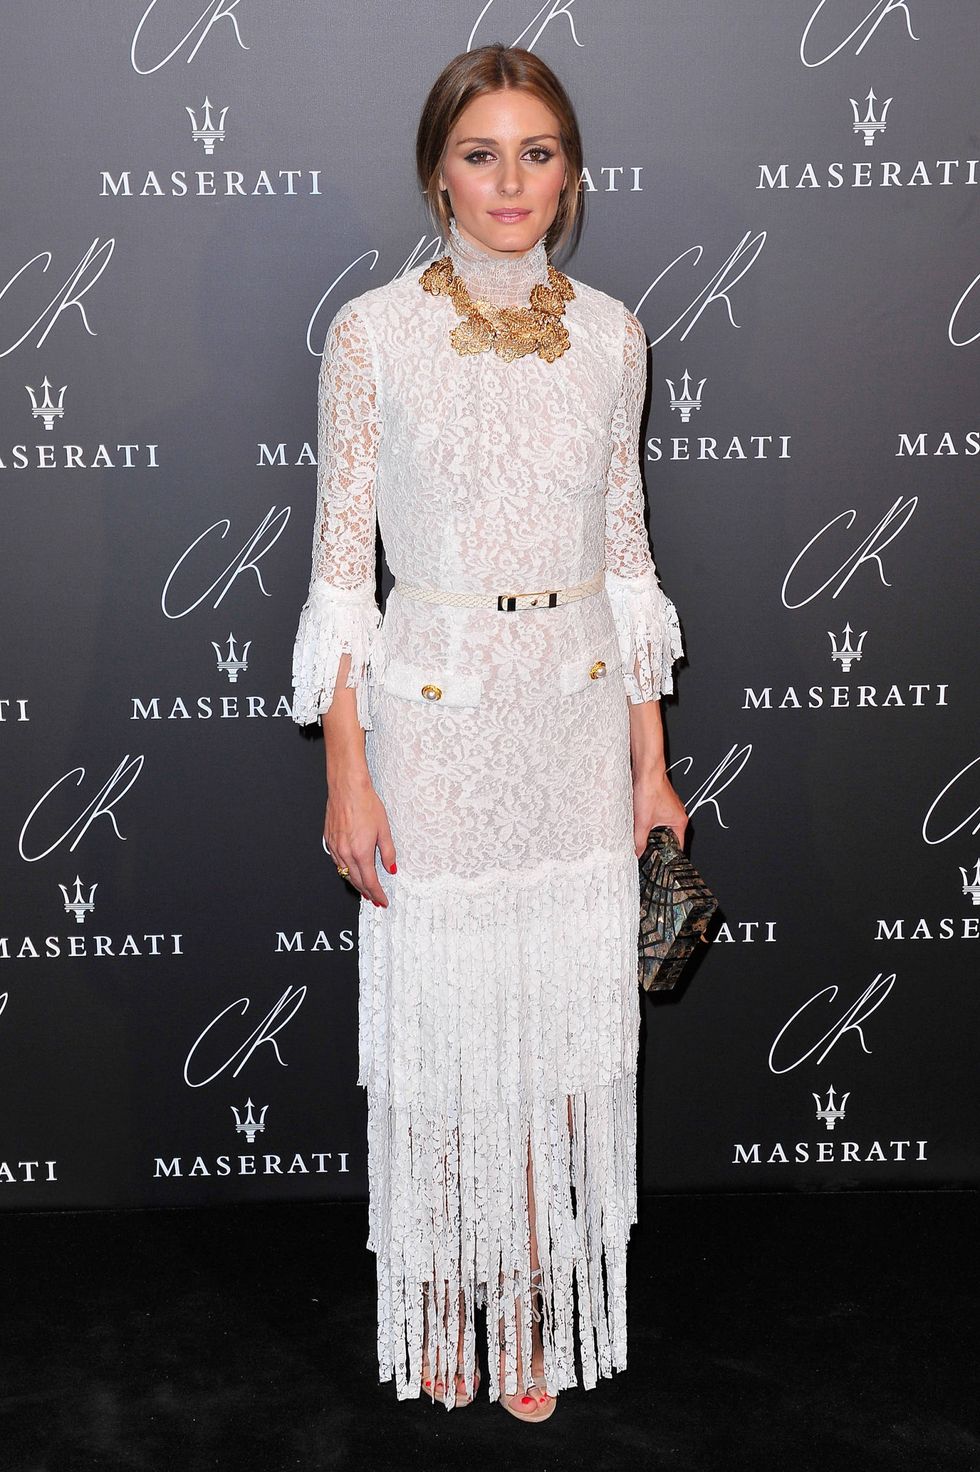 Olivia Palermo at the CR Fashion Book launch